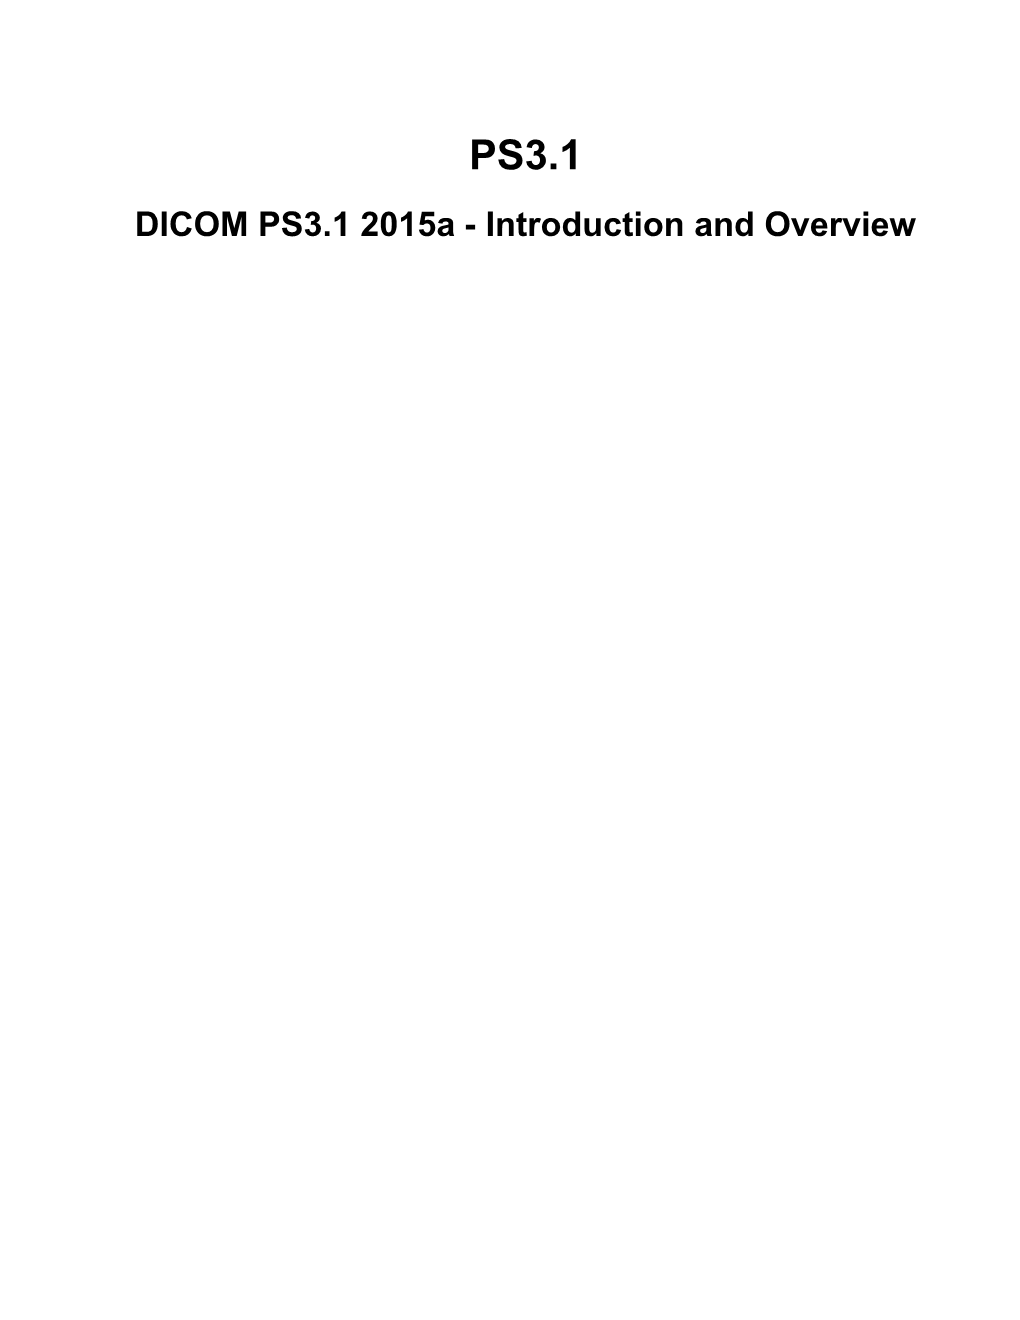 DICOM PS3.1 2015A - Introduction and Overview